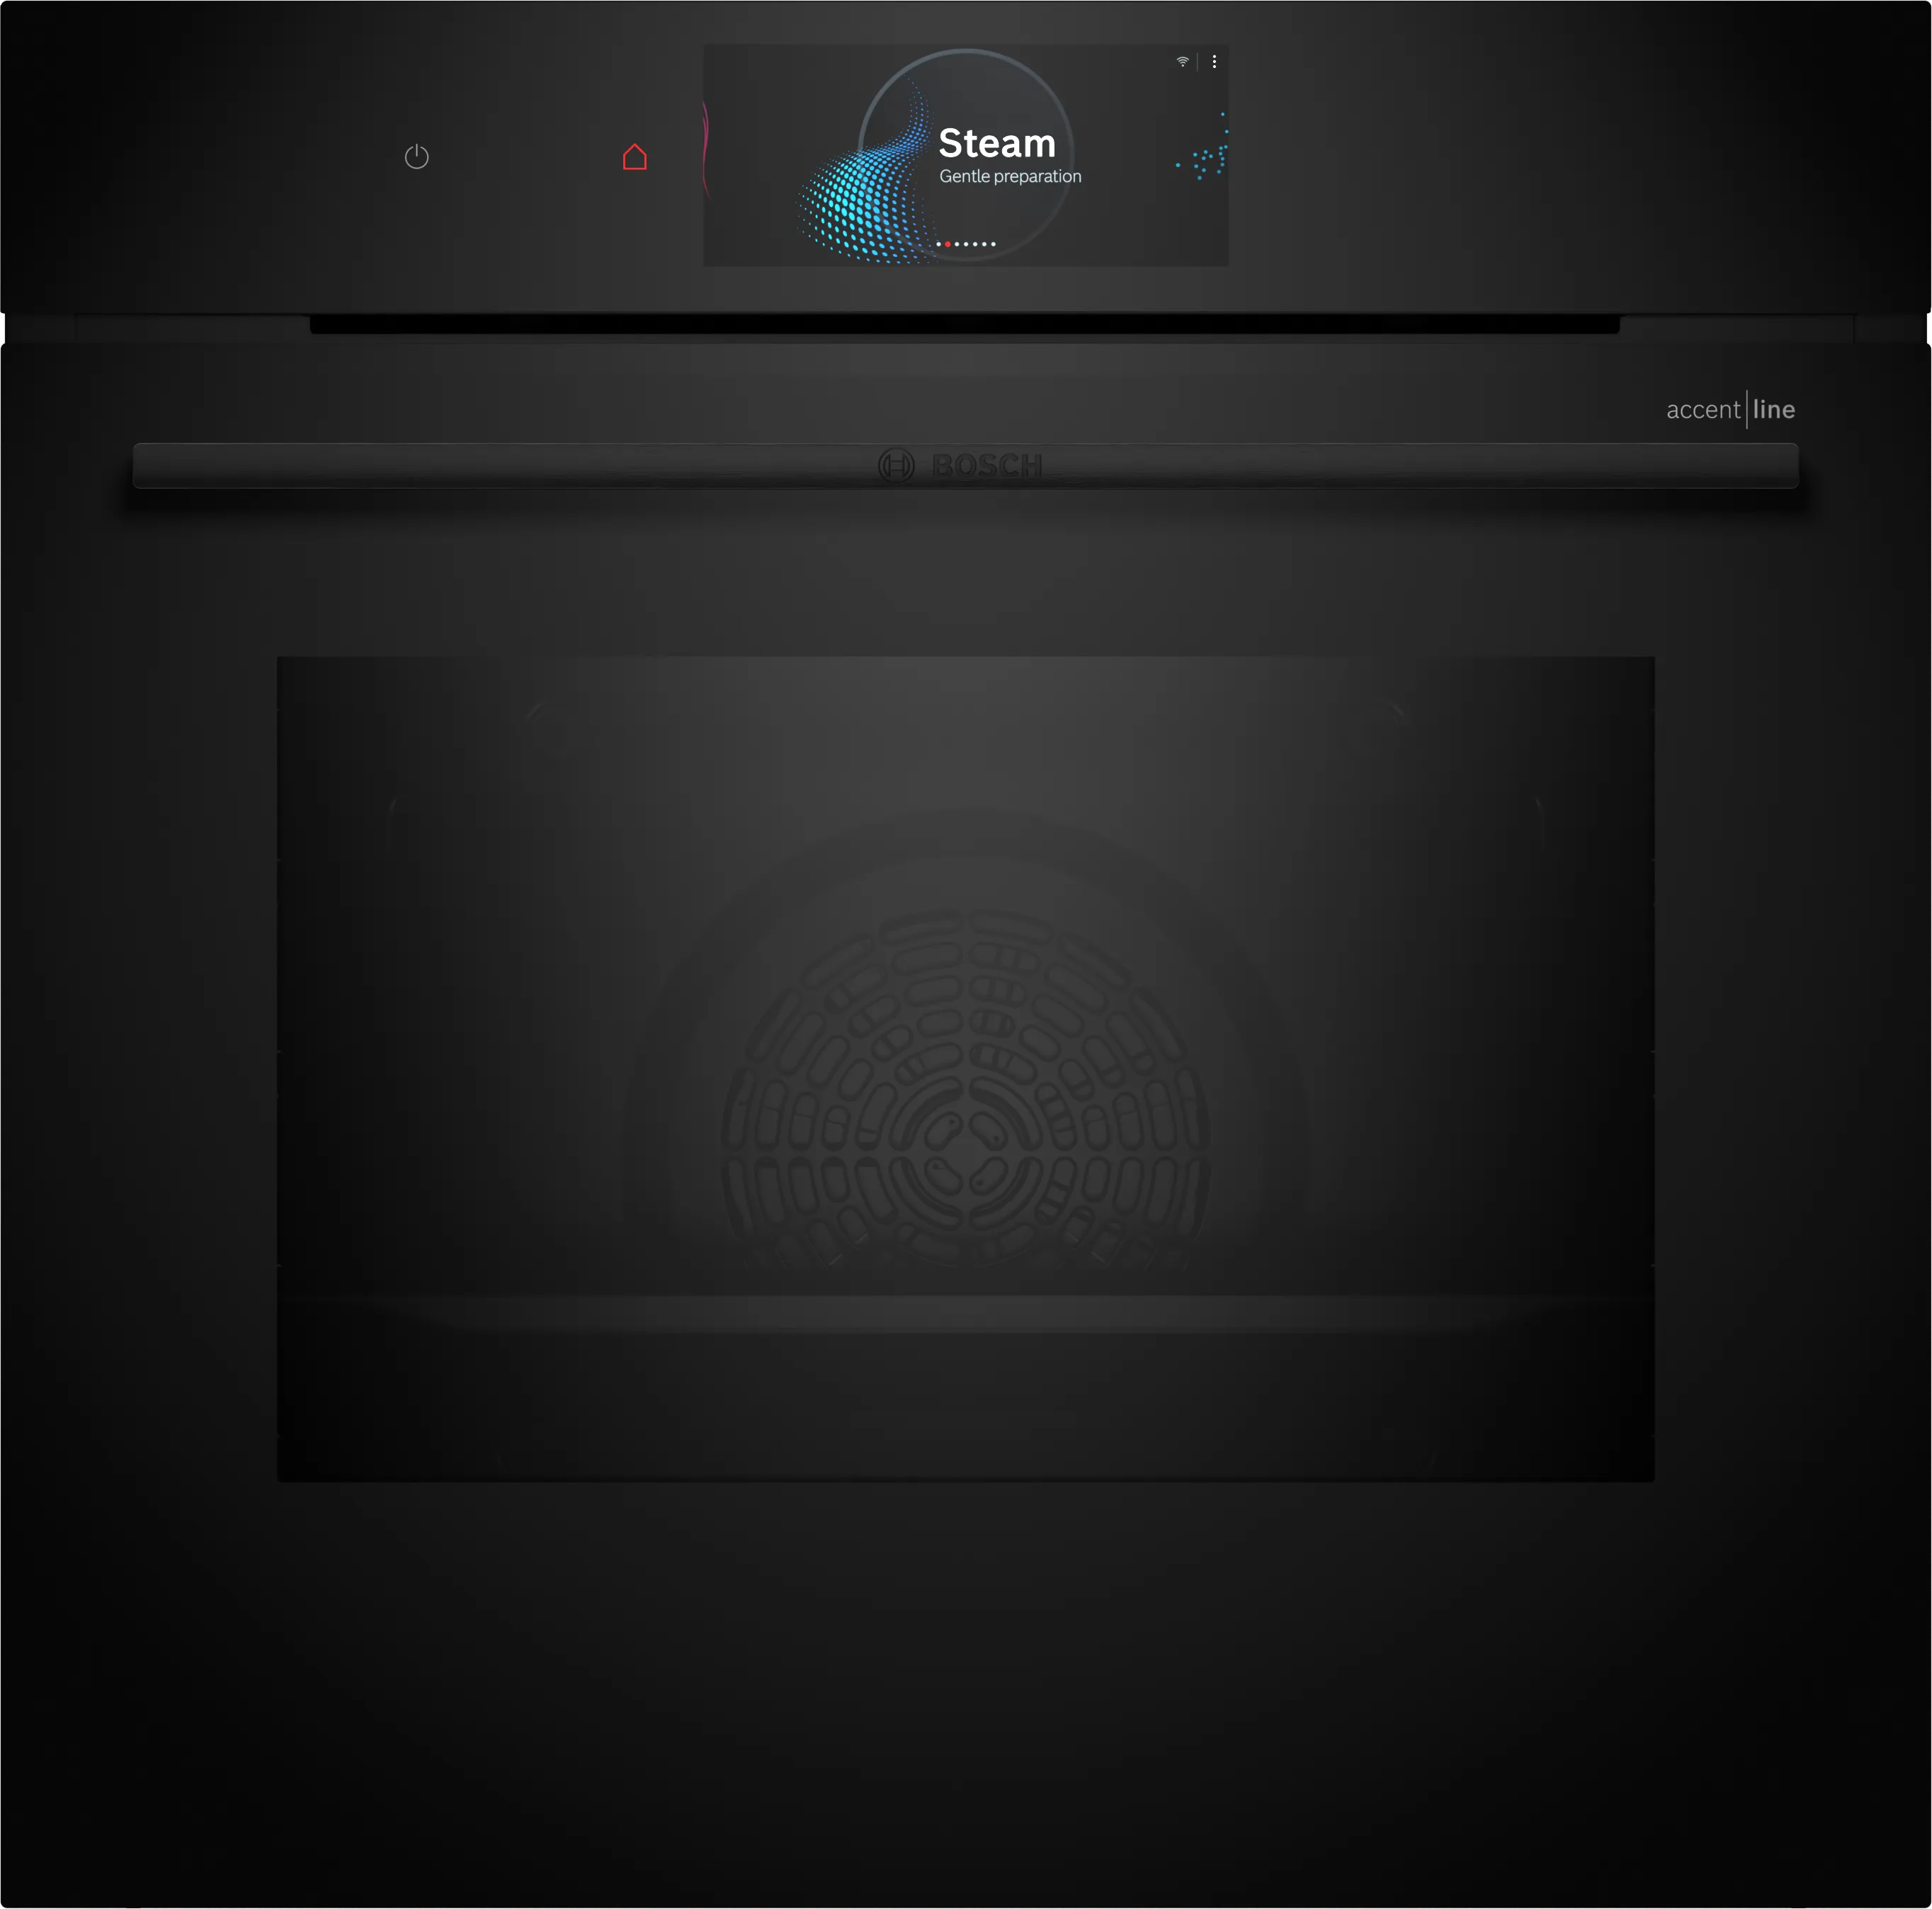 Series 8, Built-in oven with steam function, 60 x 60 cm, Black, HSG958ED1